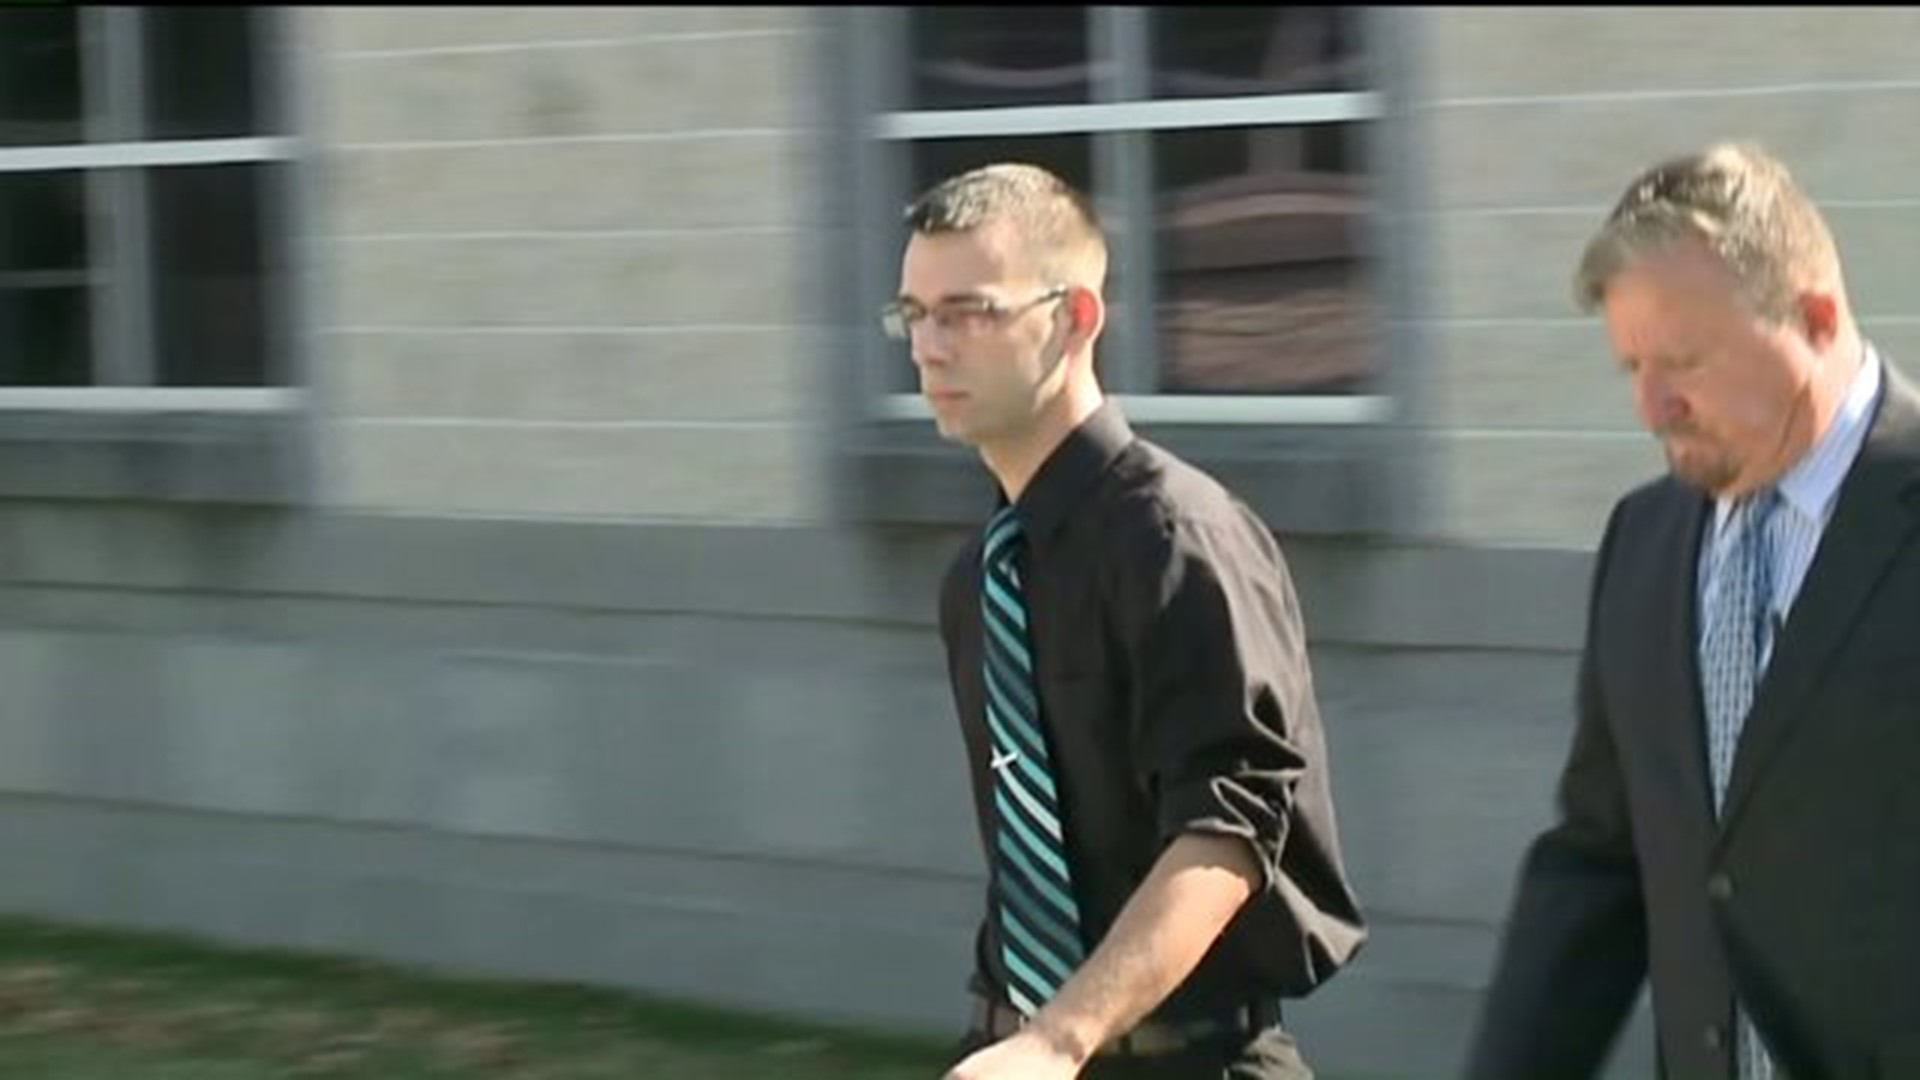 EMT Accused of Sexually Assaulting Patients in Ambulance Back in Court